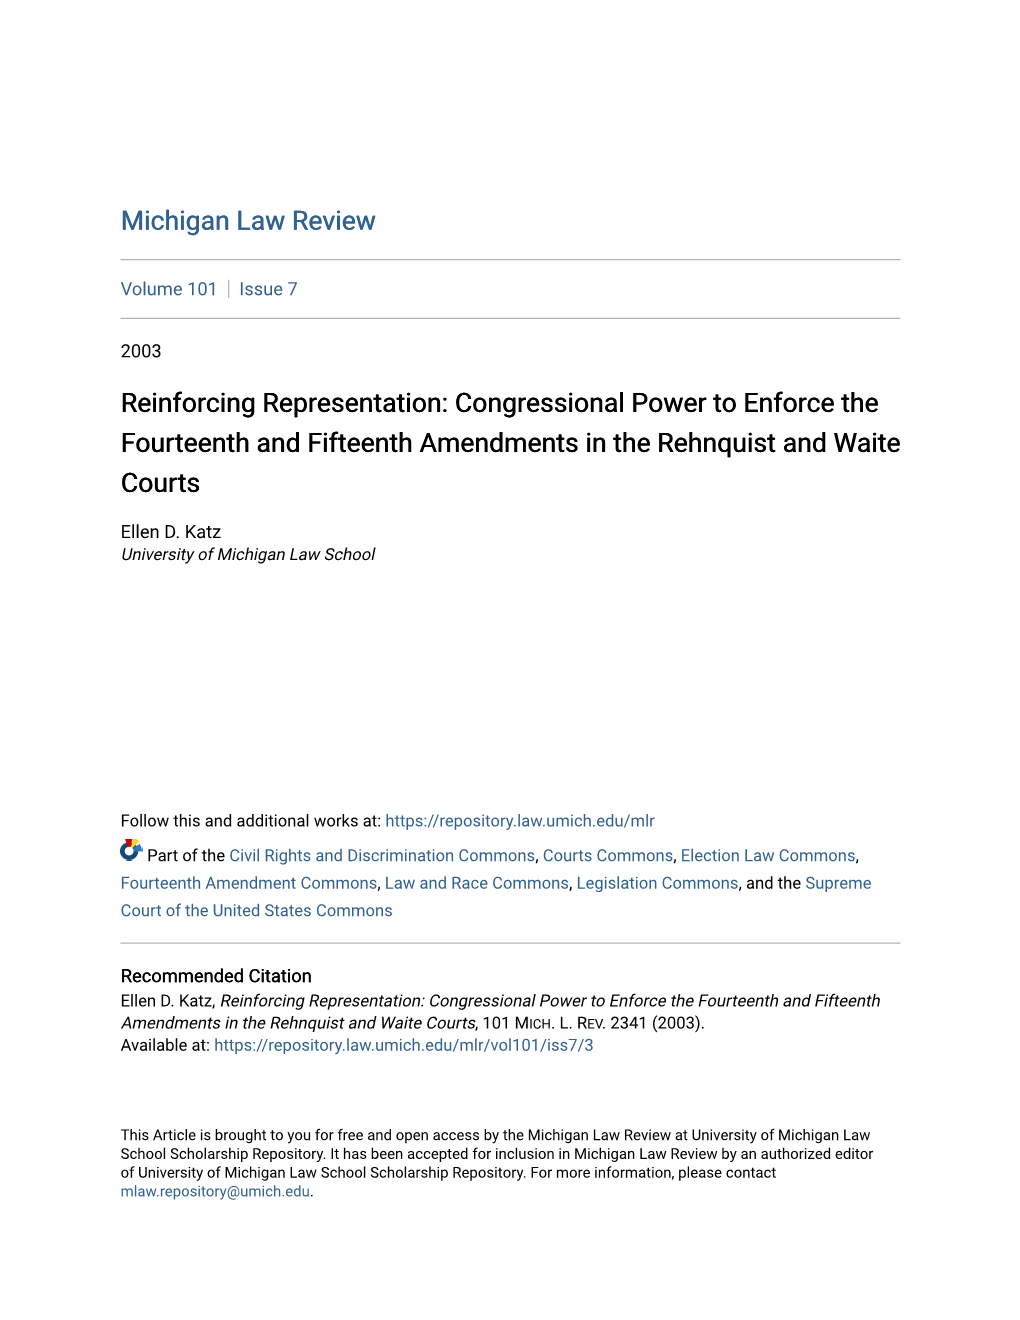 Reinforcing Representation: Congressional Power to Enforce the Fourteenth and Fifteenth Amendments in the Rehnquist and Waite Courts